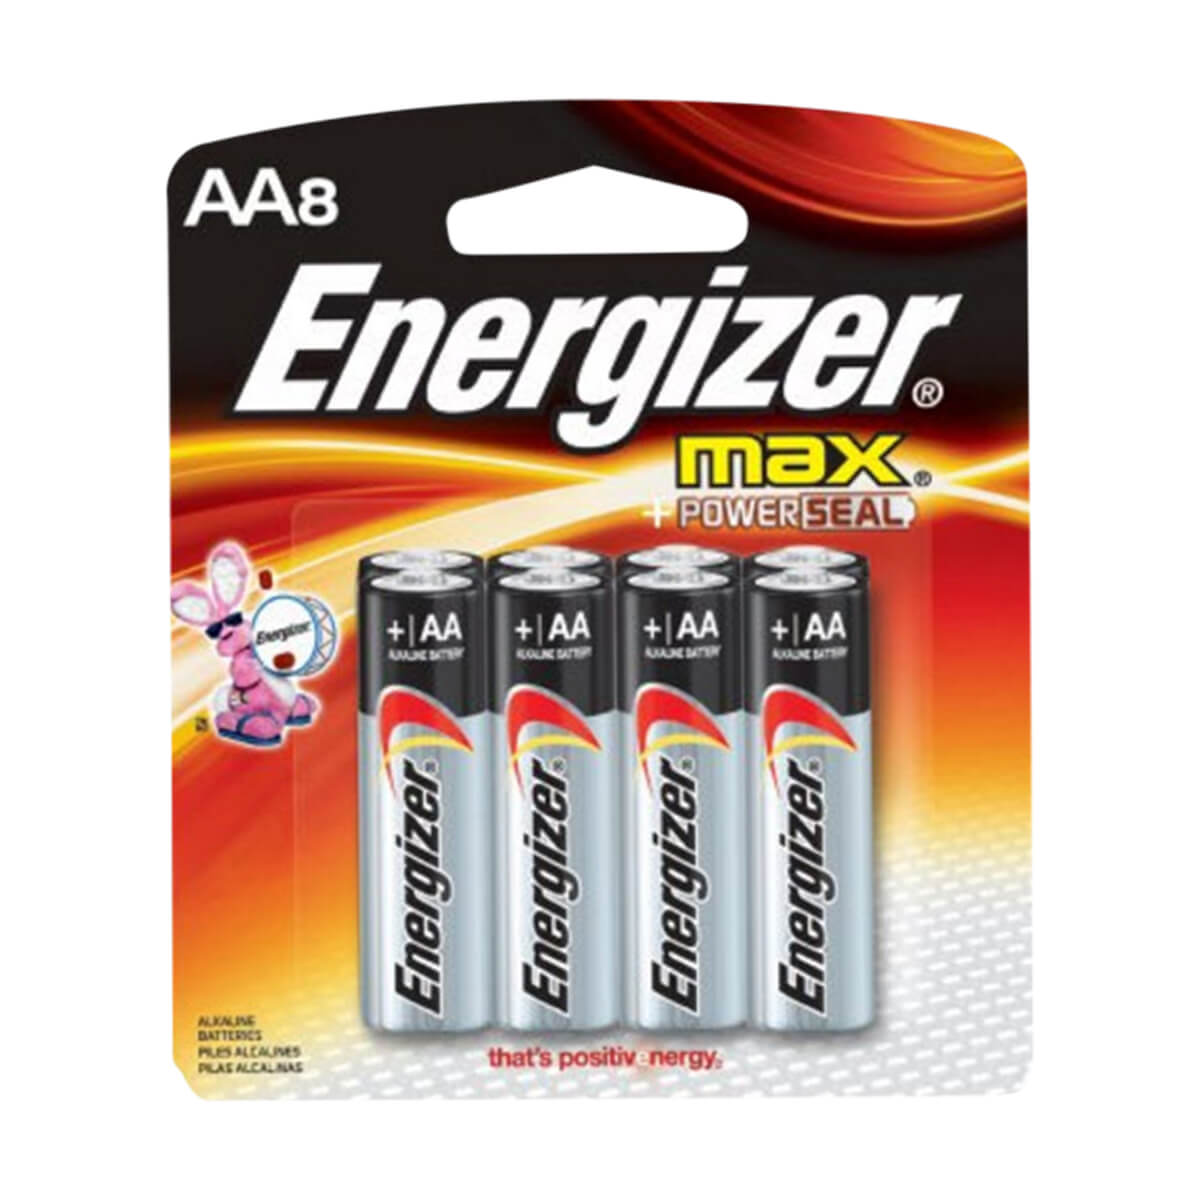 Energizer® AA Batteries - 8 Pack